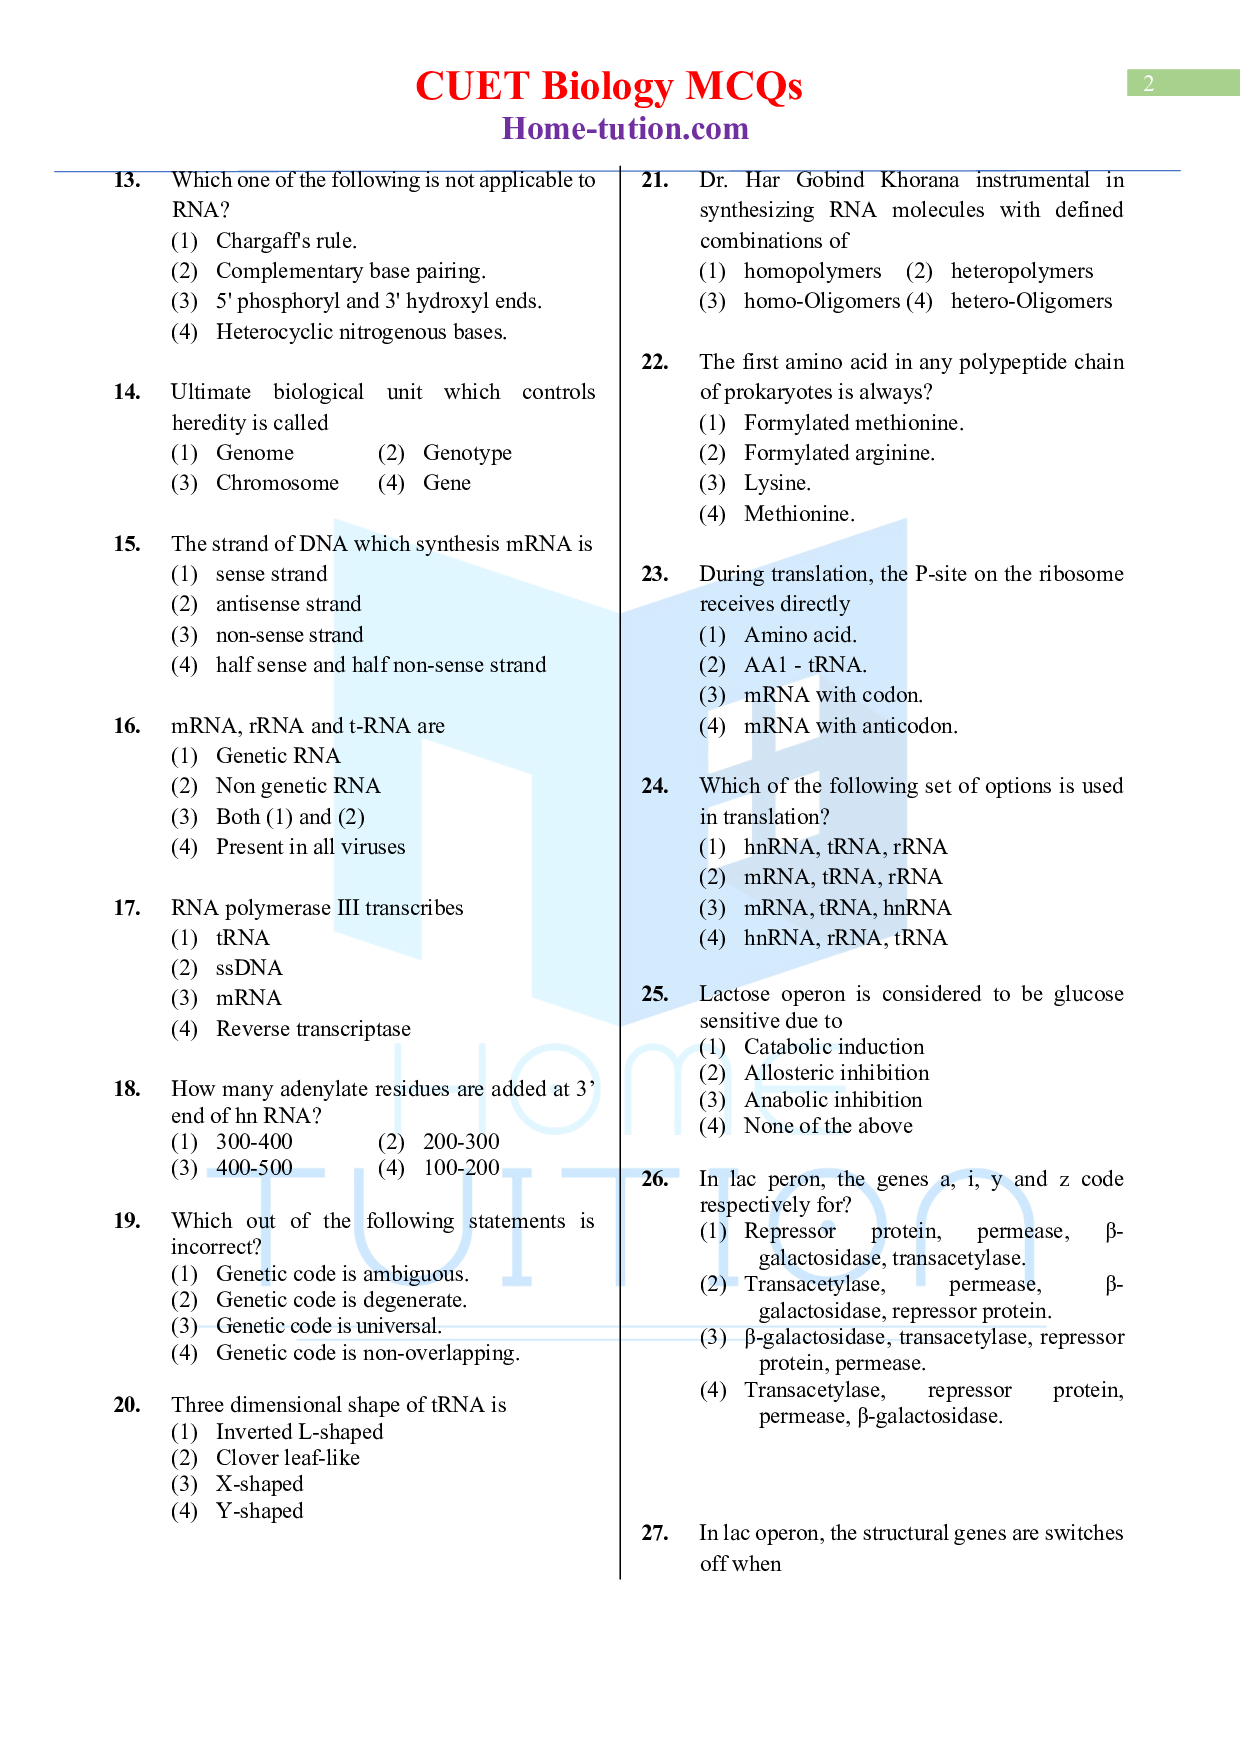 Biology MCQ Questions for CUET Chapter 6 Molecular Basis of Inheritance